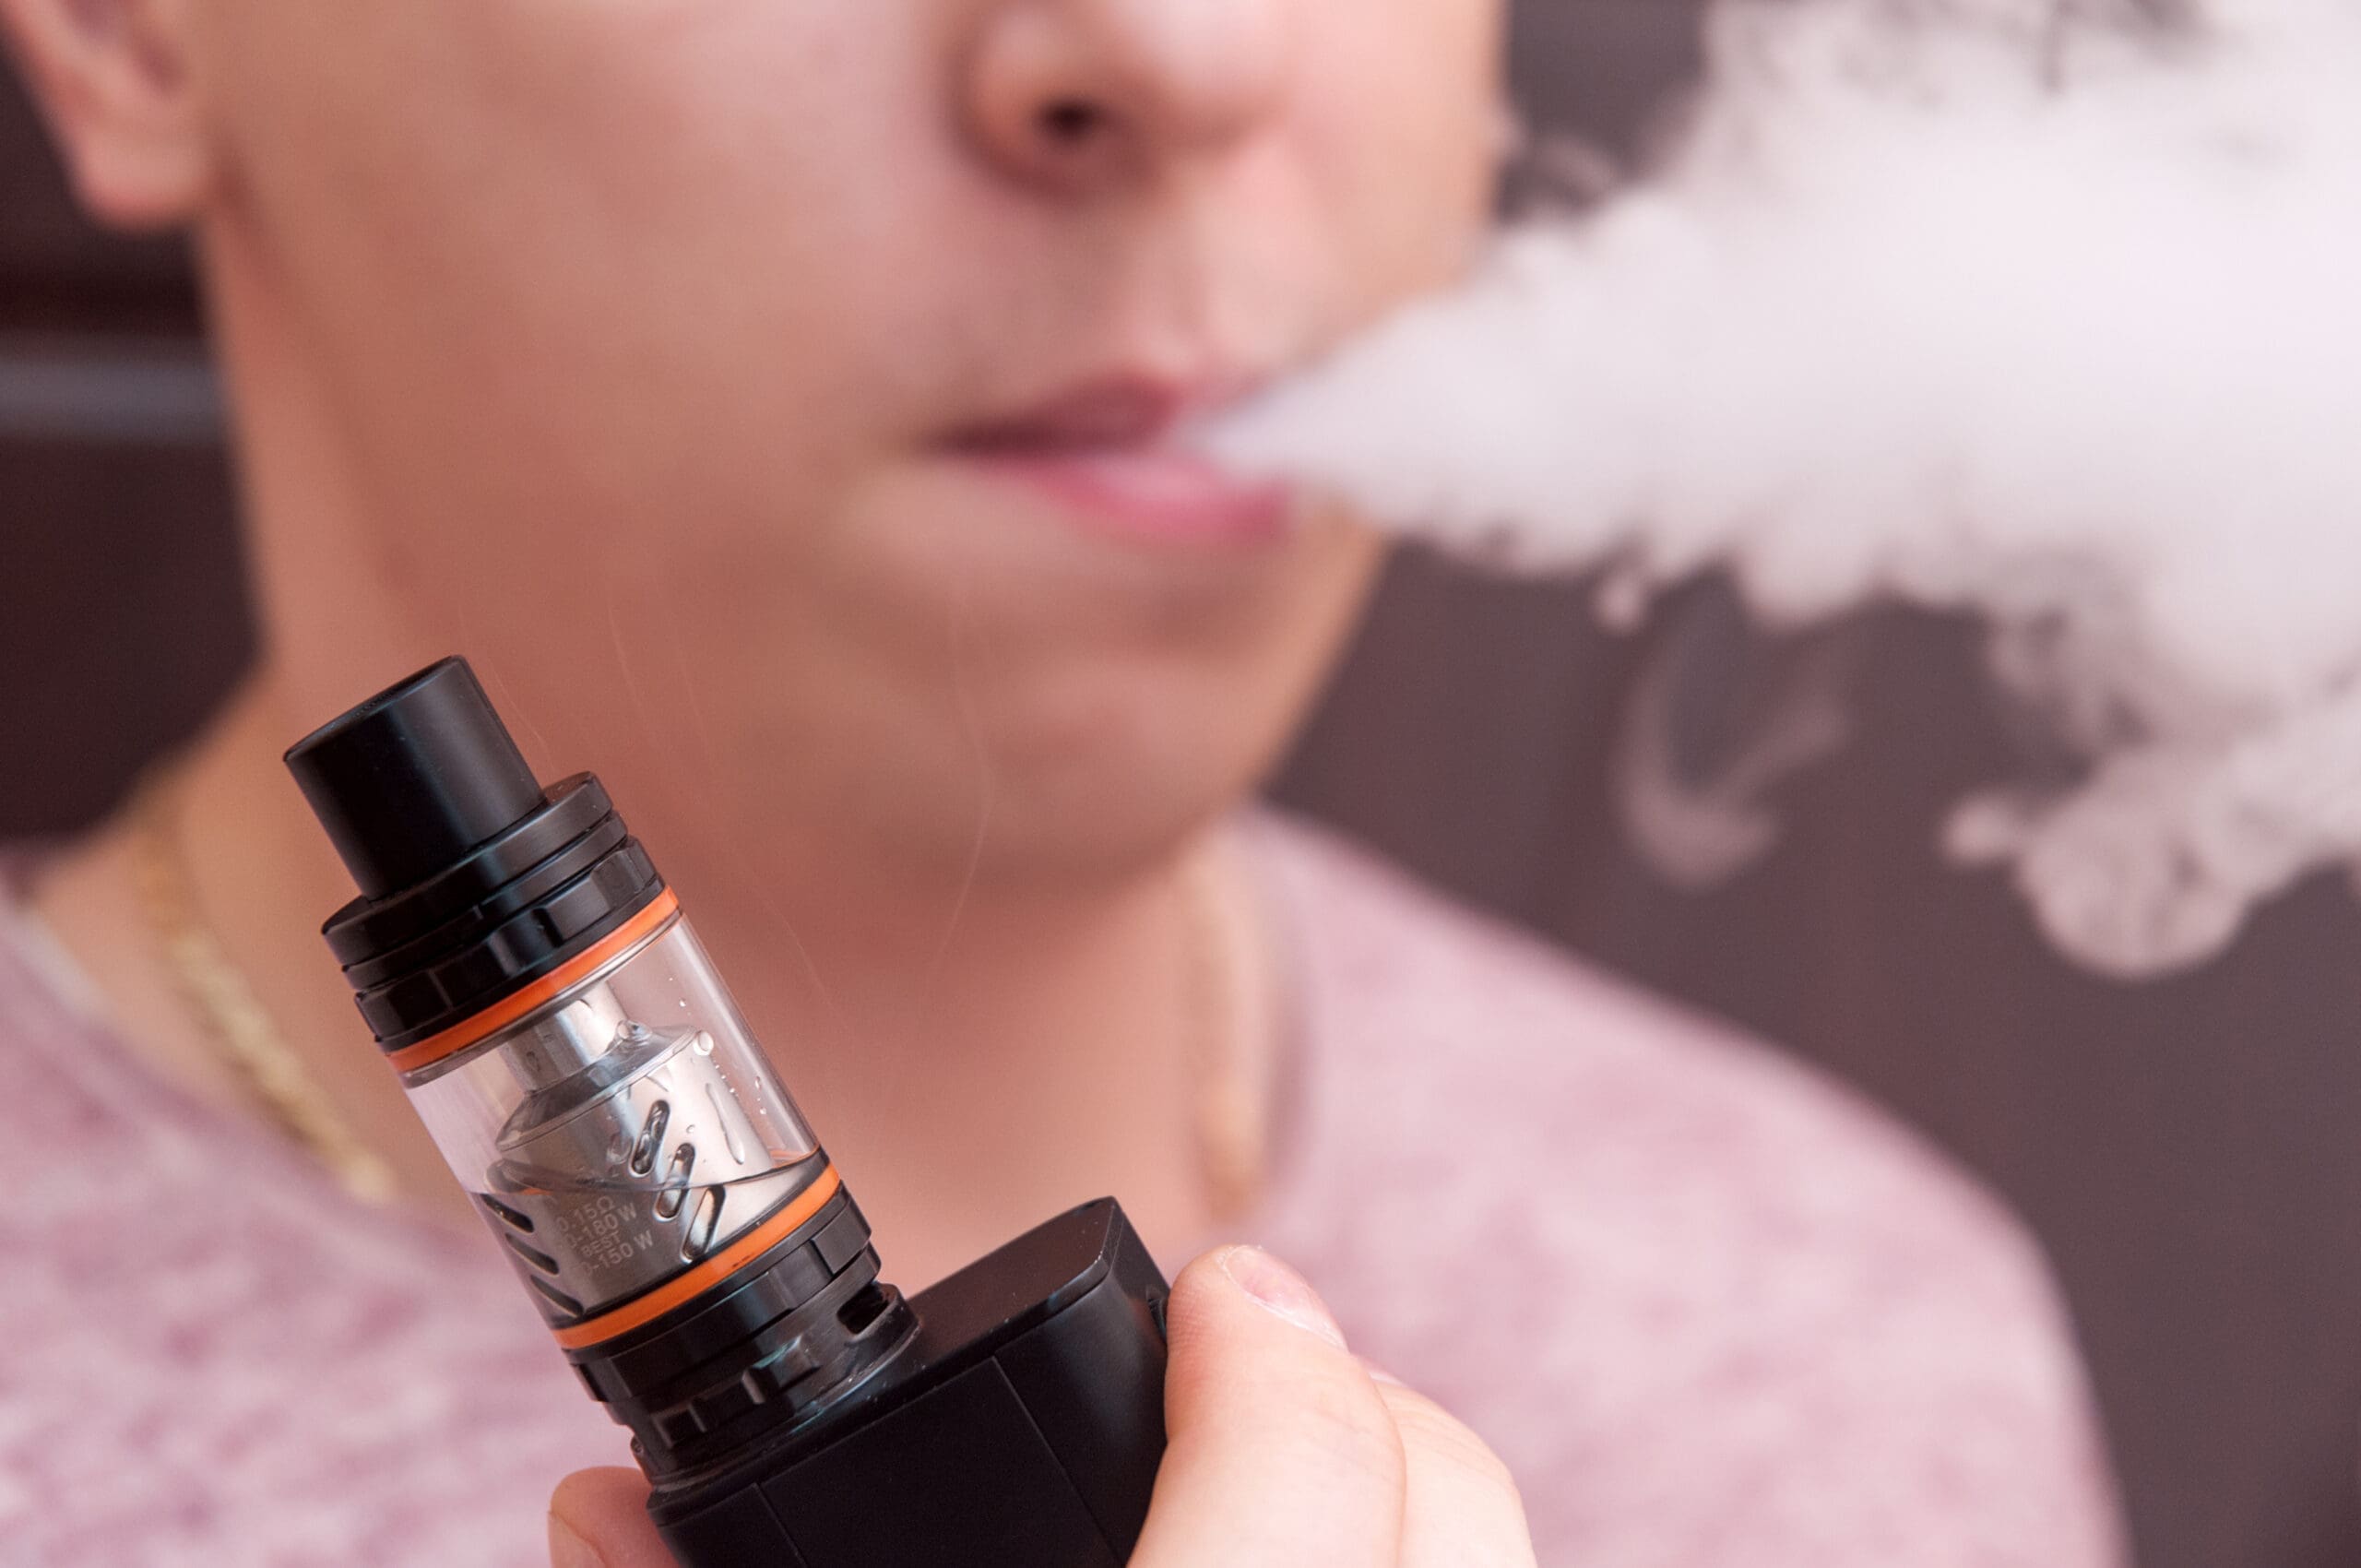 Significant Harm Linked to Vaping